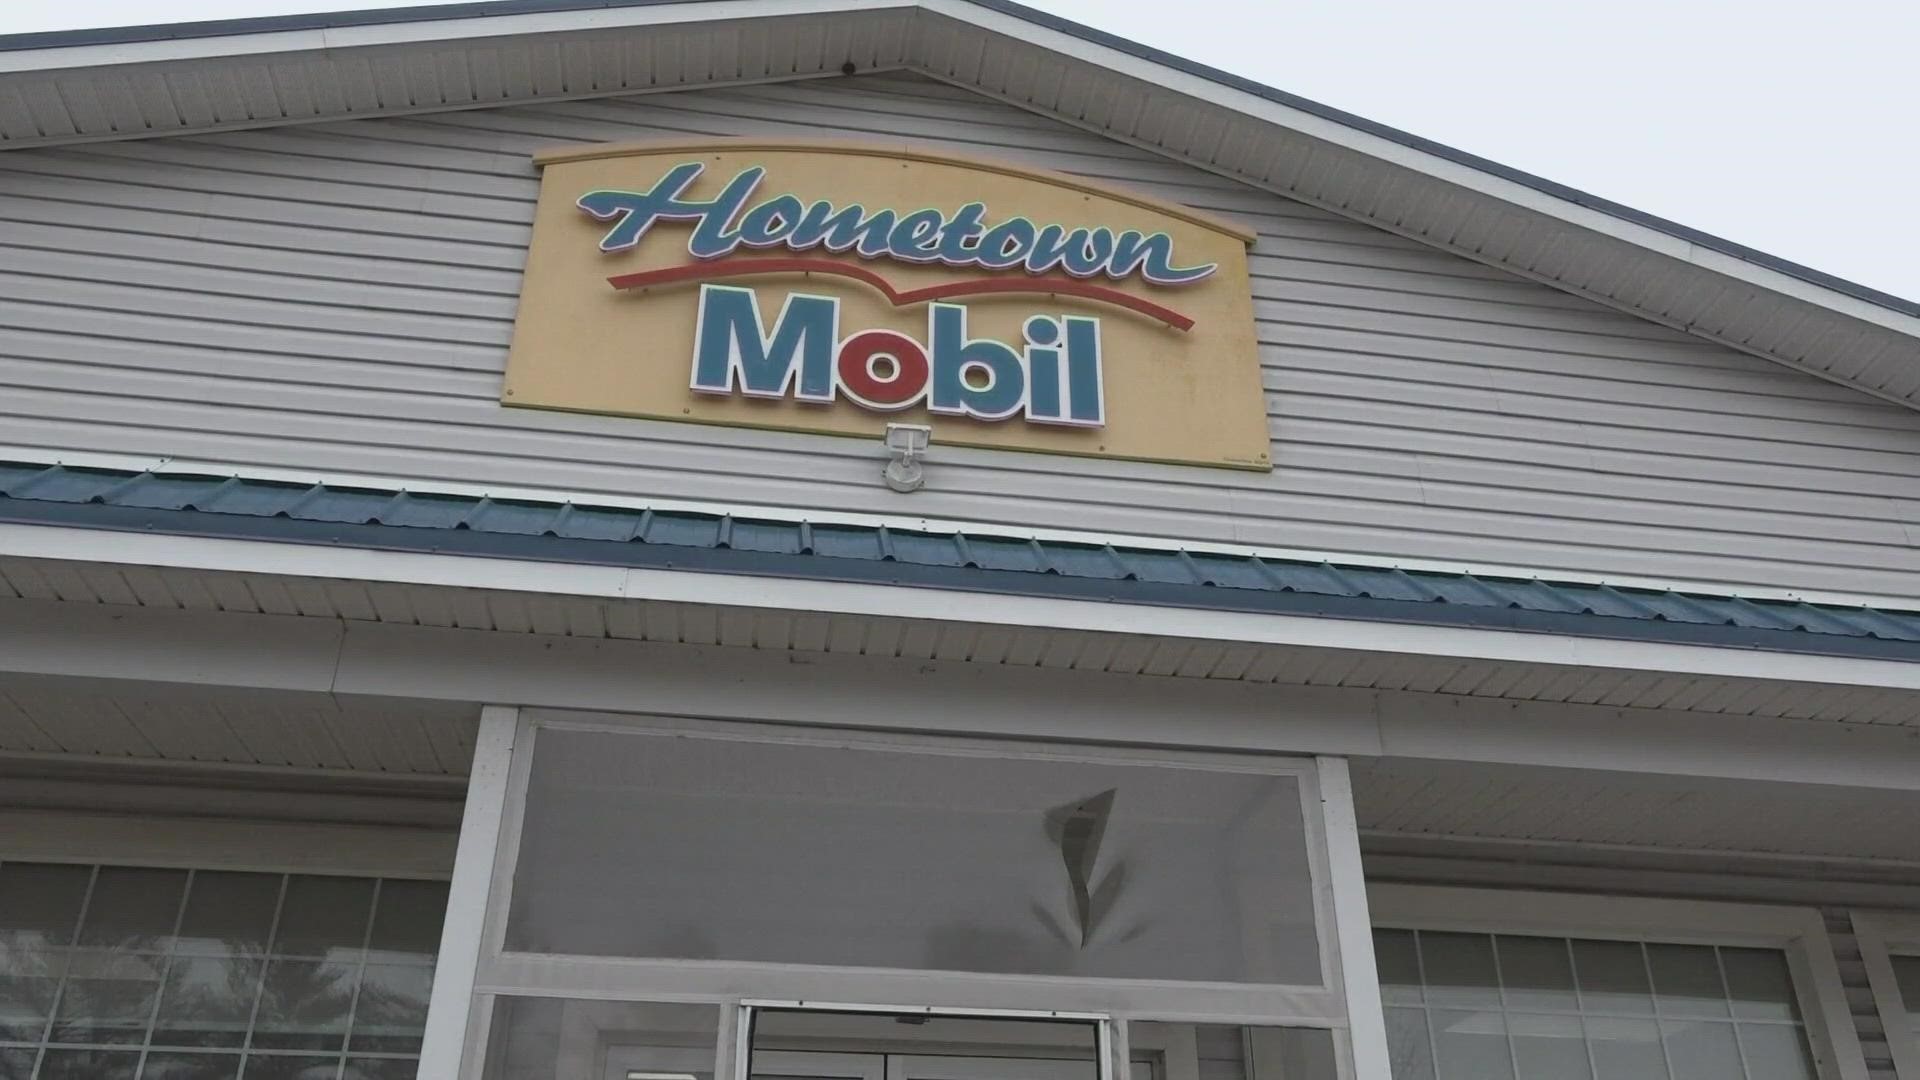 The winning ticket was purchased for the Jan. 13 drawing at the Hometown Gas & Grill in Lebanon, Maine.